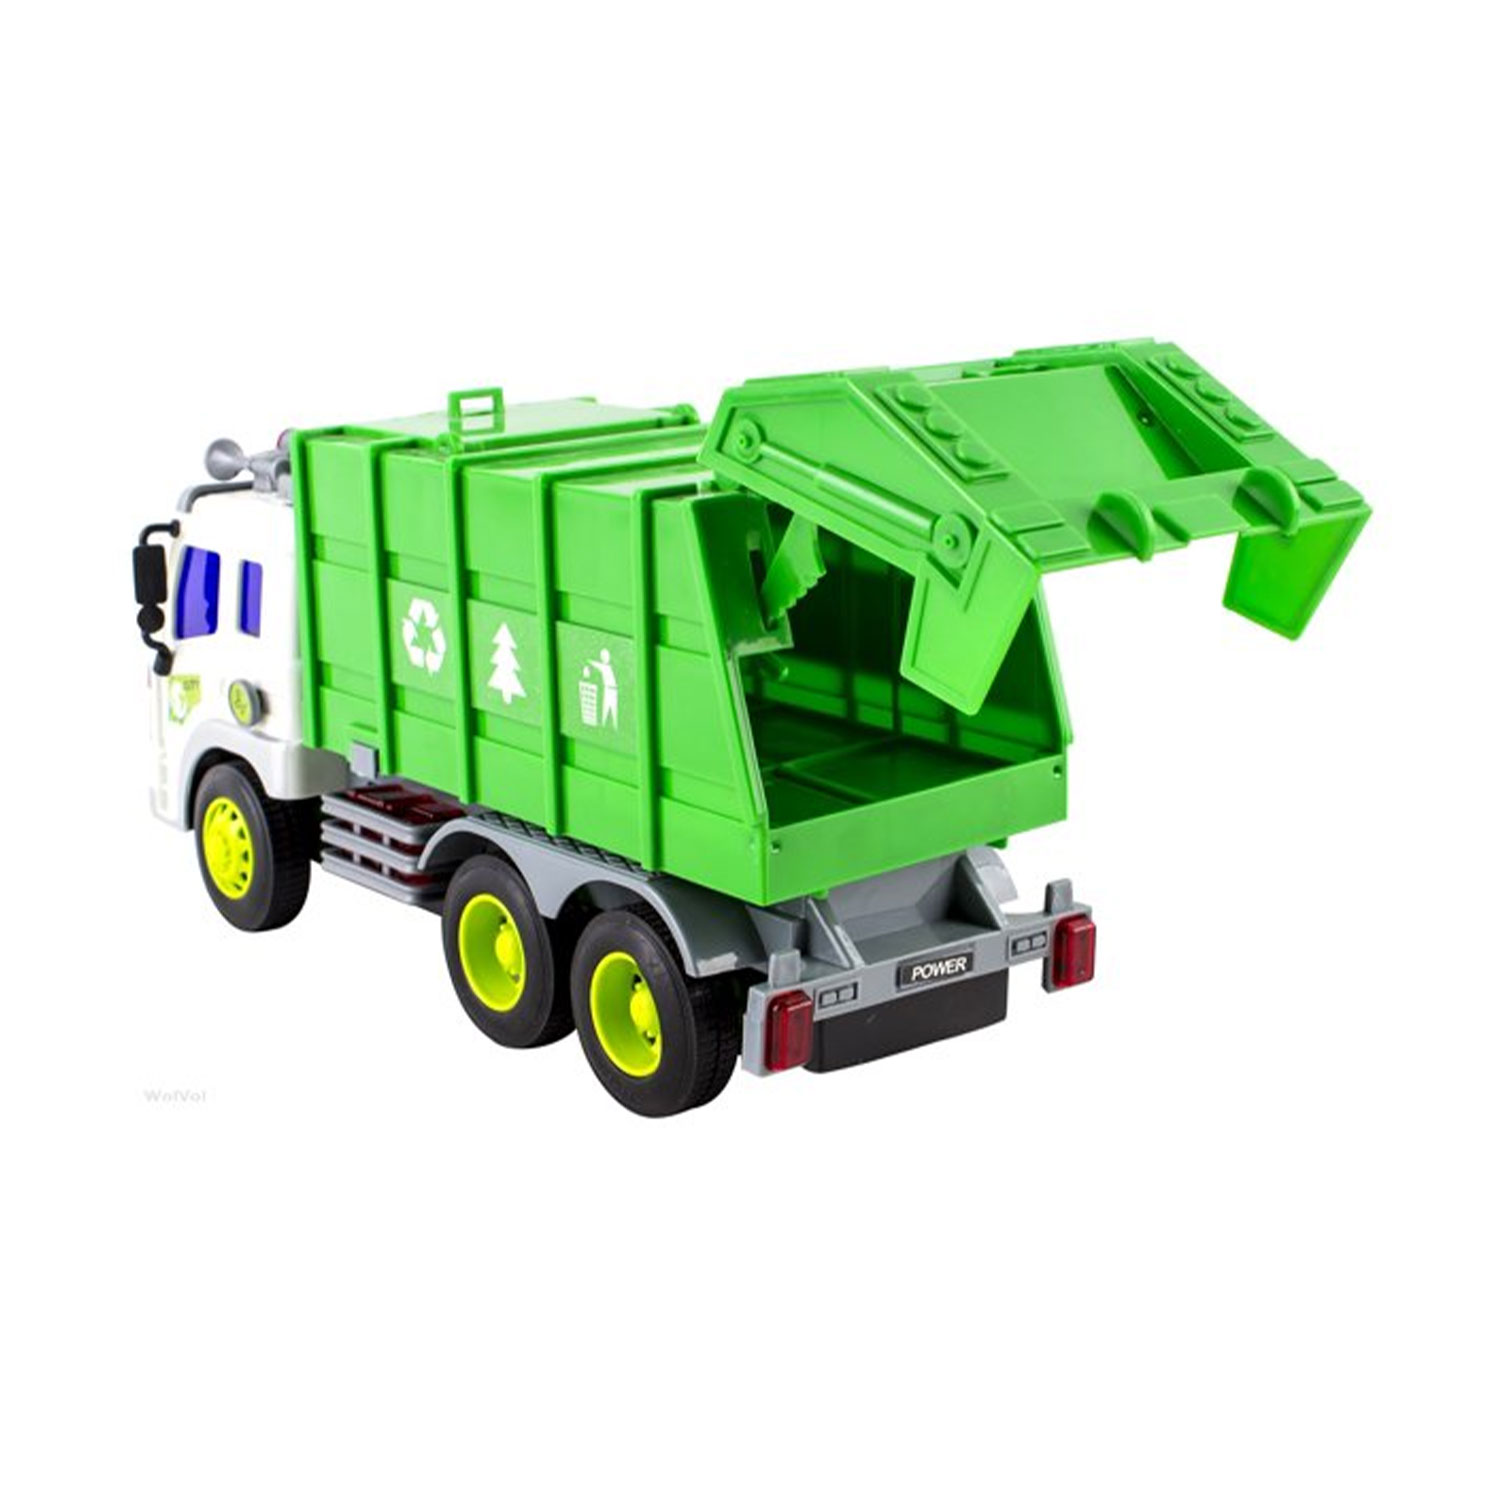 WolVolk-Green Trash Toy Truck With Lights And Sounds